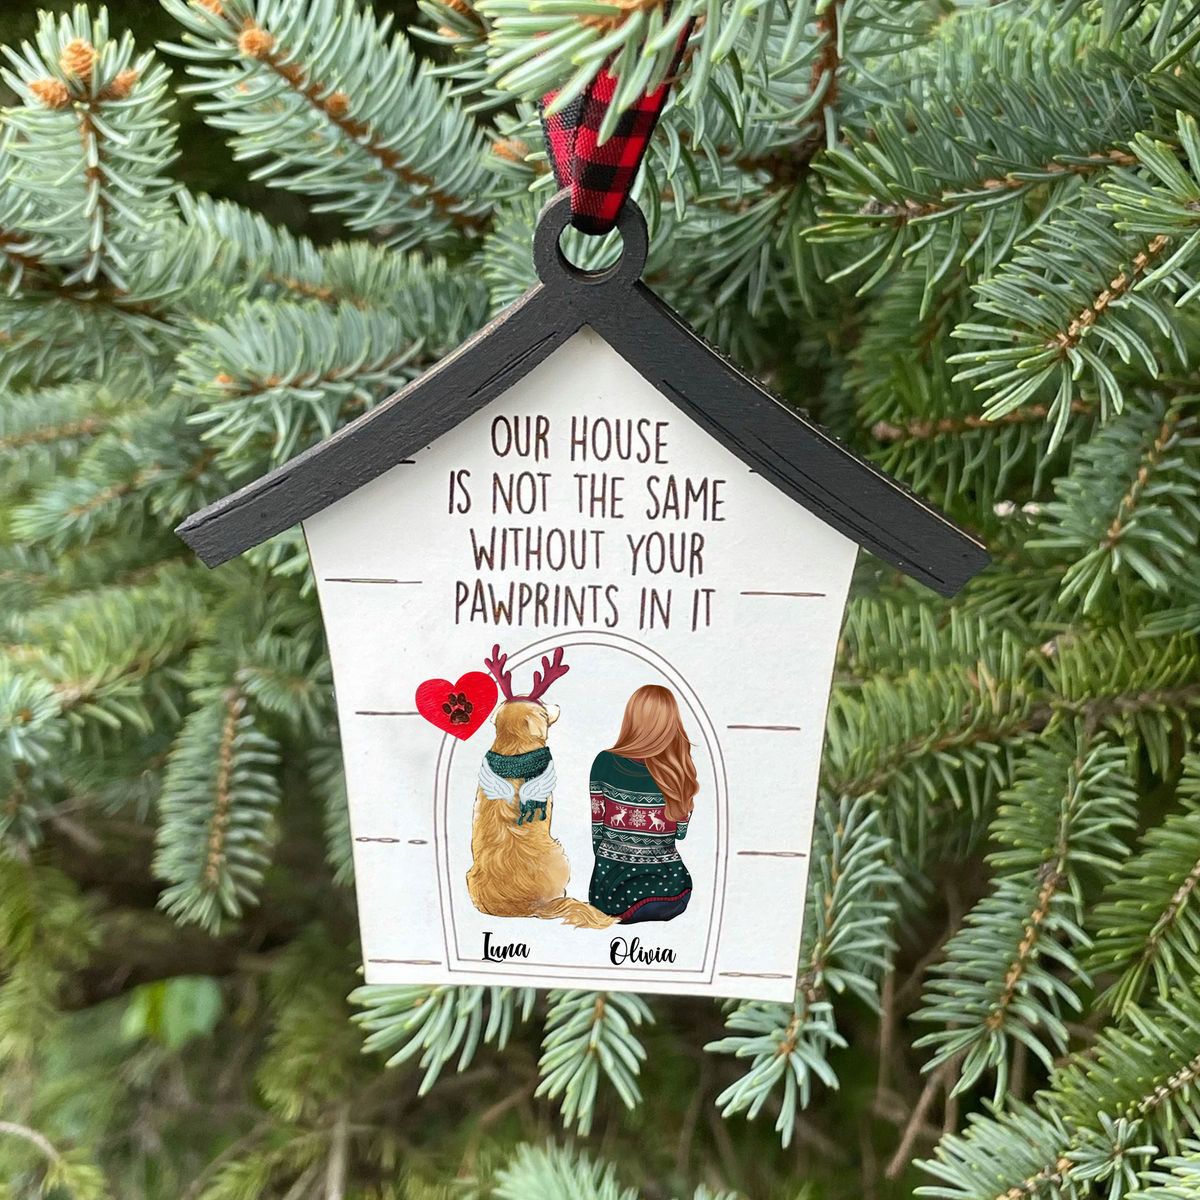 Personalized Customized Pet Ornament - Christmas Ornament In Memory - Memorial Ornament